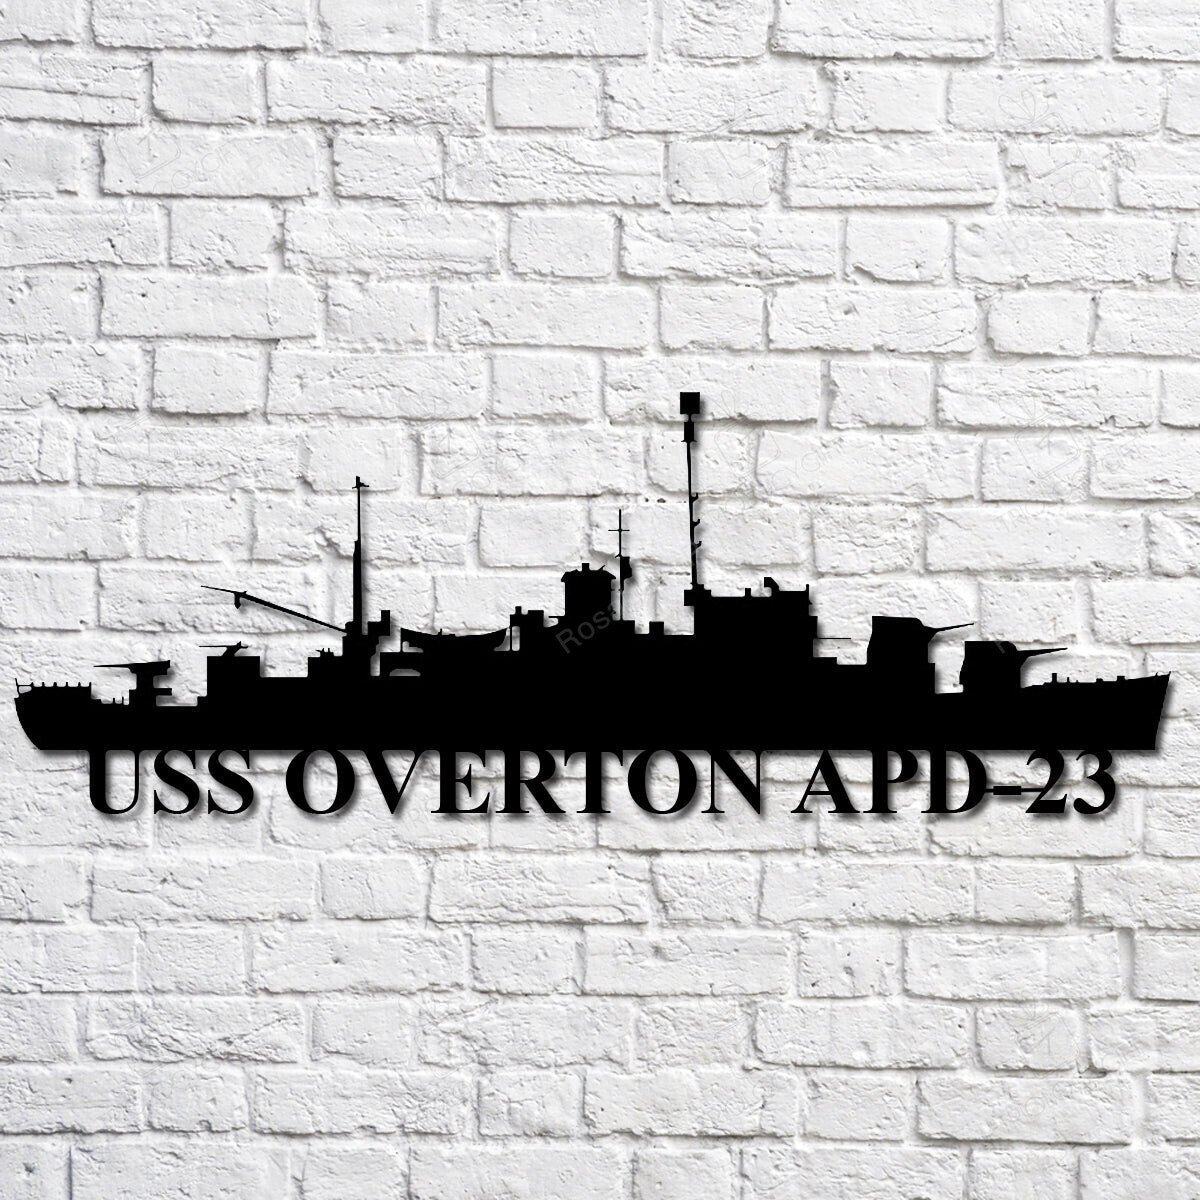 Uss Overton Apd 23 Navy Ship Metal Art, Gift For Navy Veteran, Navy Ships Silhouette Metal Art, Navy Laser Cut Metal Signs 12x12IN